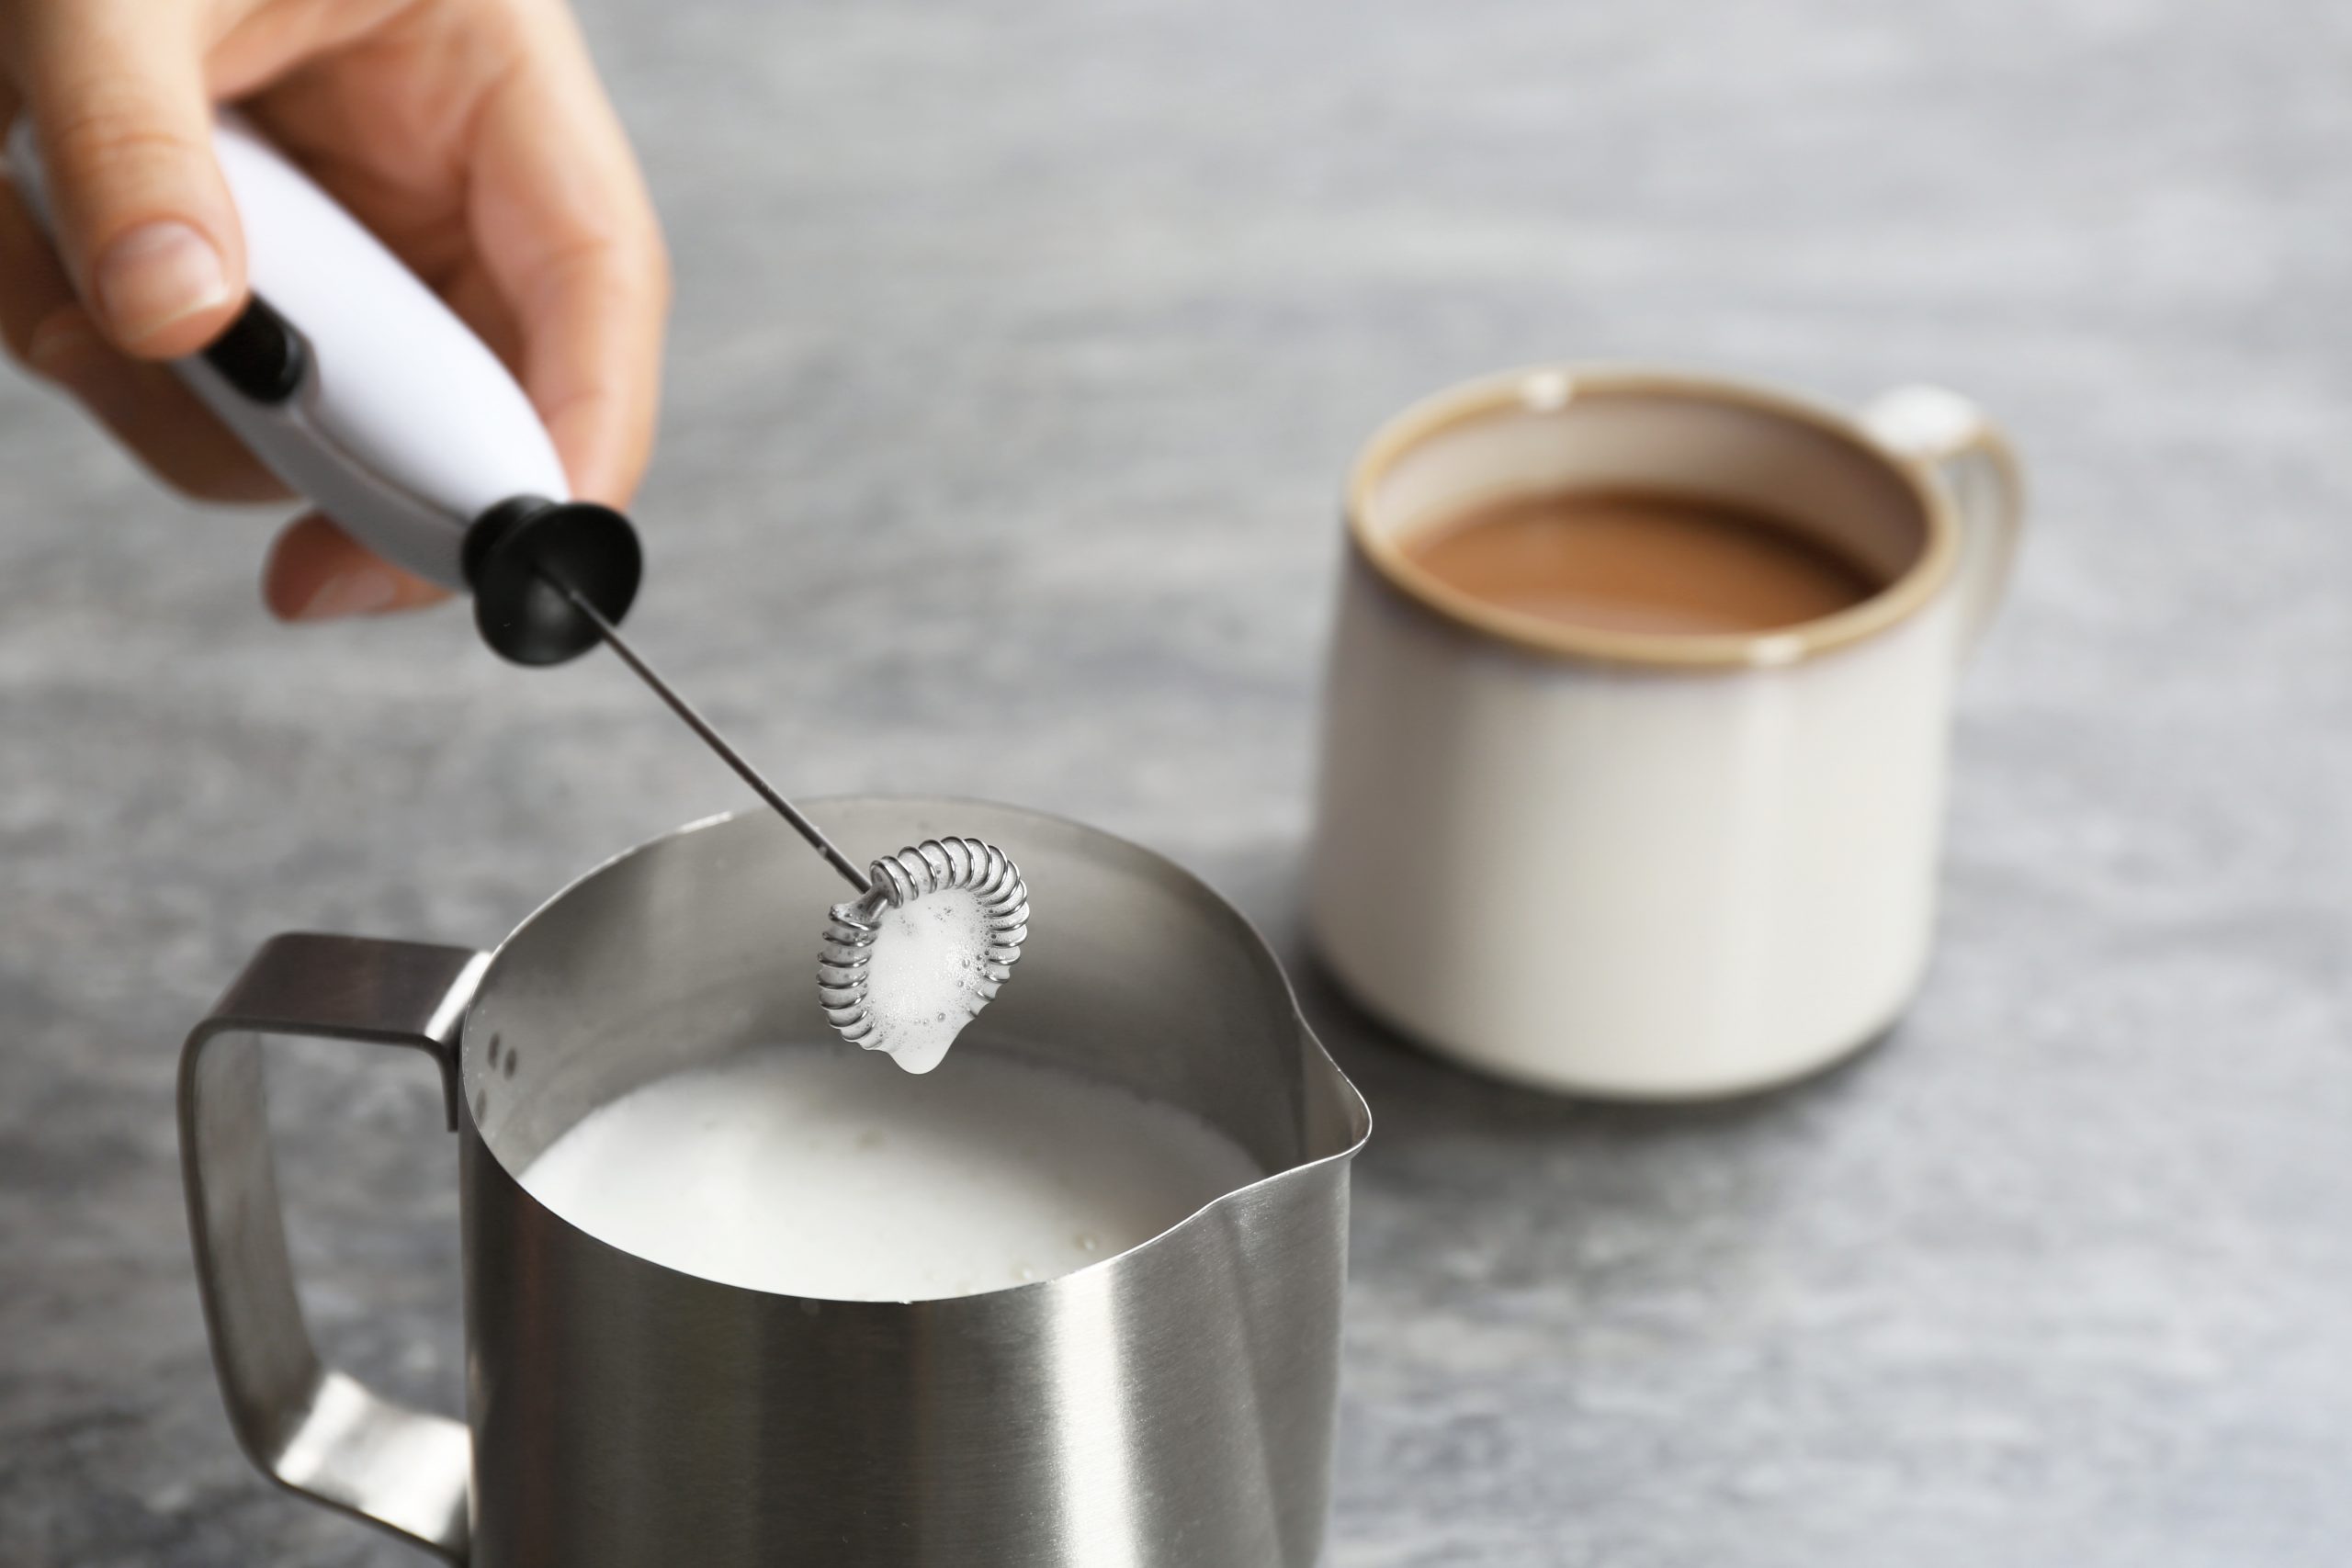 Handheld Cordless Milk Frother – Sofie's Cottage